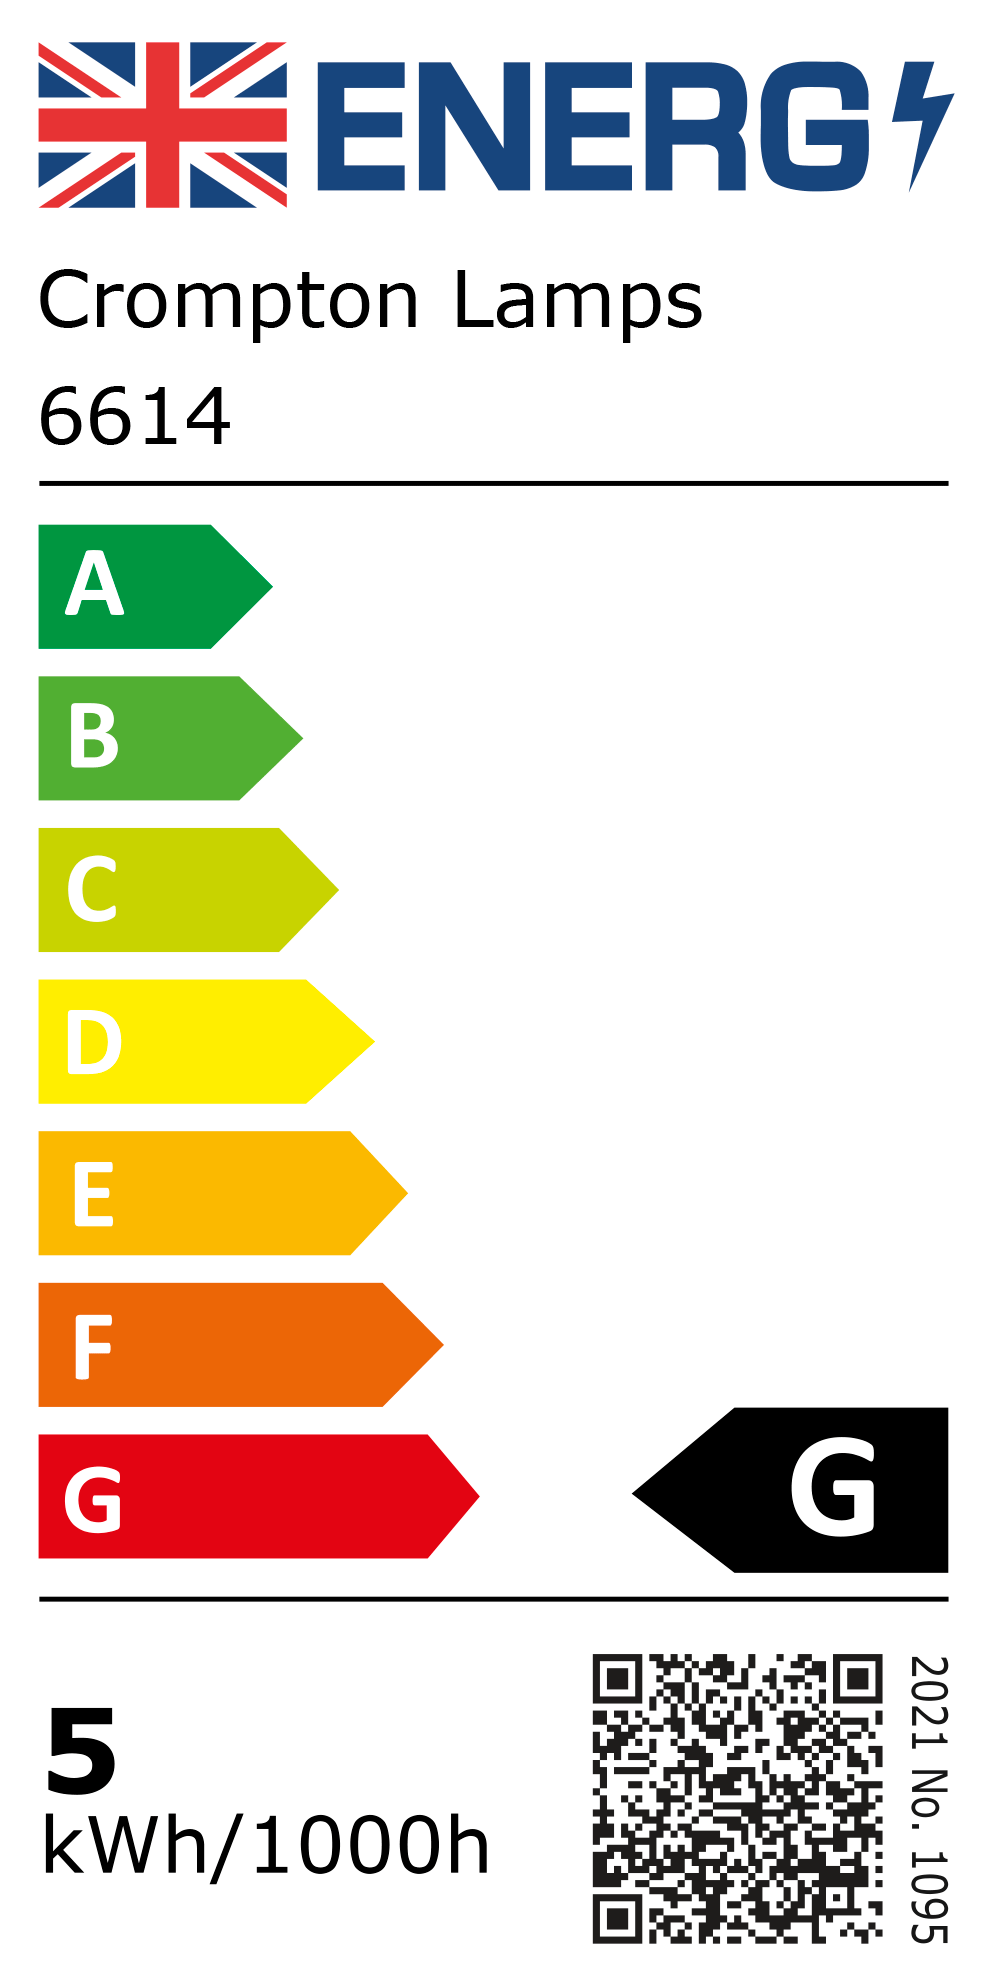 New 2021 Energy Rating Label: Stock Code 6614